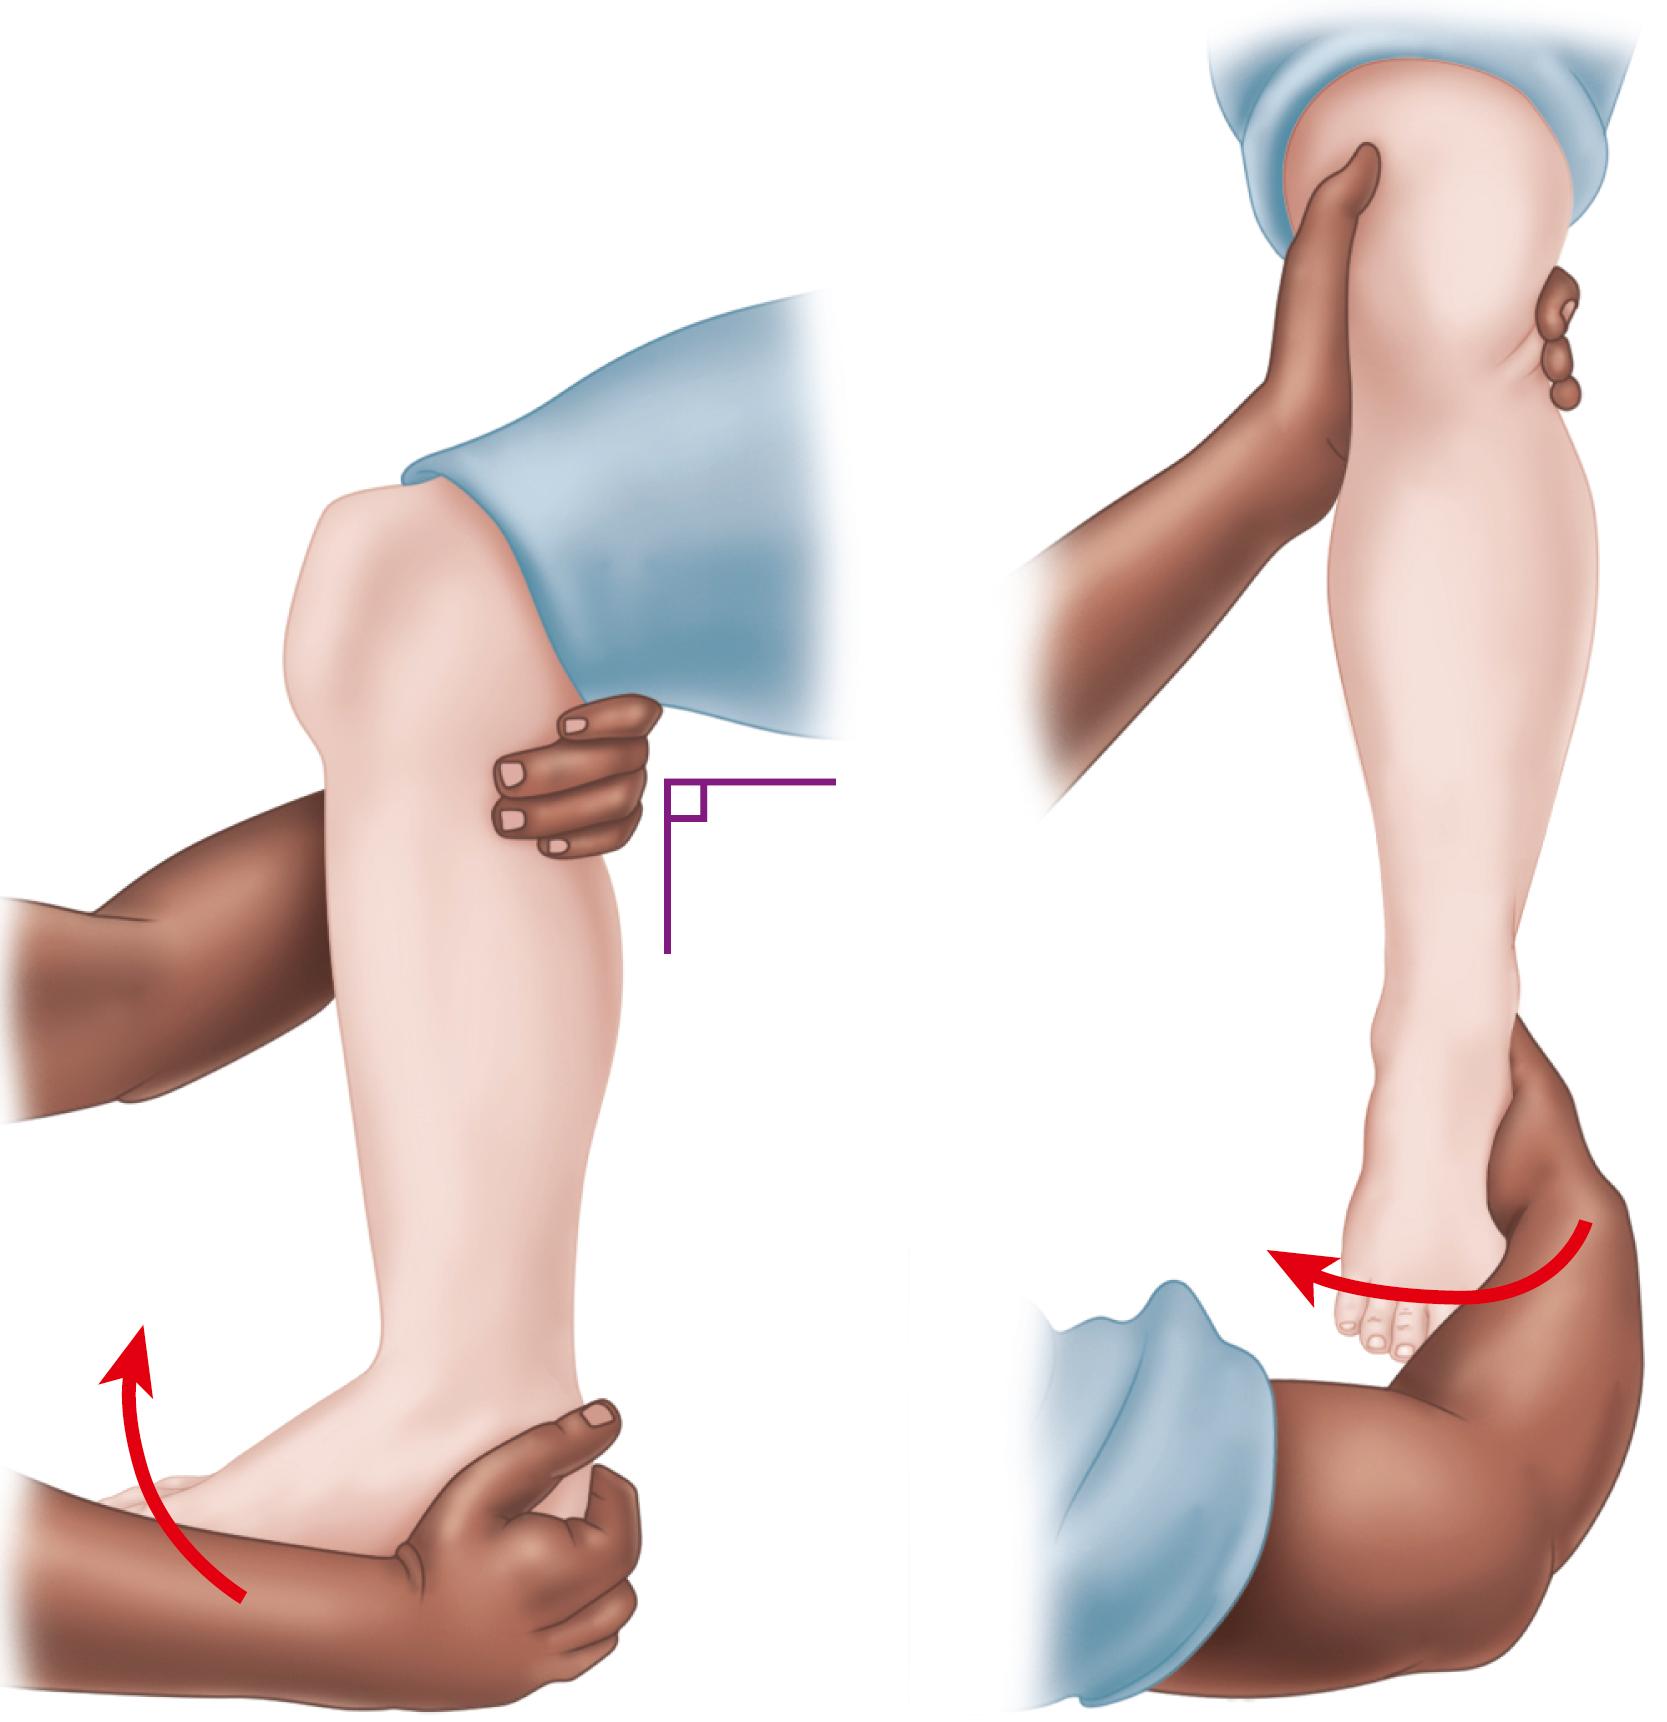 FIGURE 90.13, External rotation testing is performed by applying external rotation stress to involved foot and ankle while knee is held in 90 degrees of flexion and ankle is in neutral position. Positive test produces pain over anterior or posterior tibiofibular ligaments and over interosseous membrane.